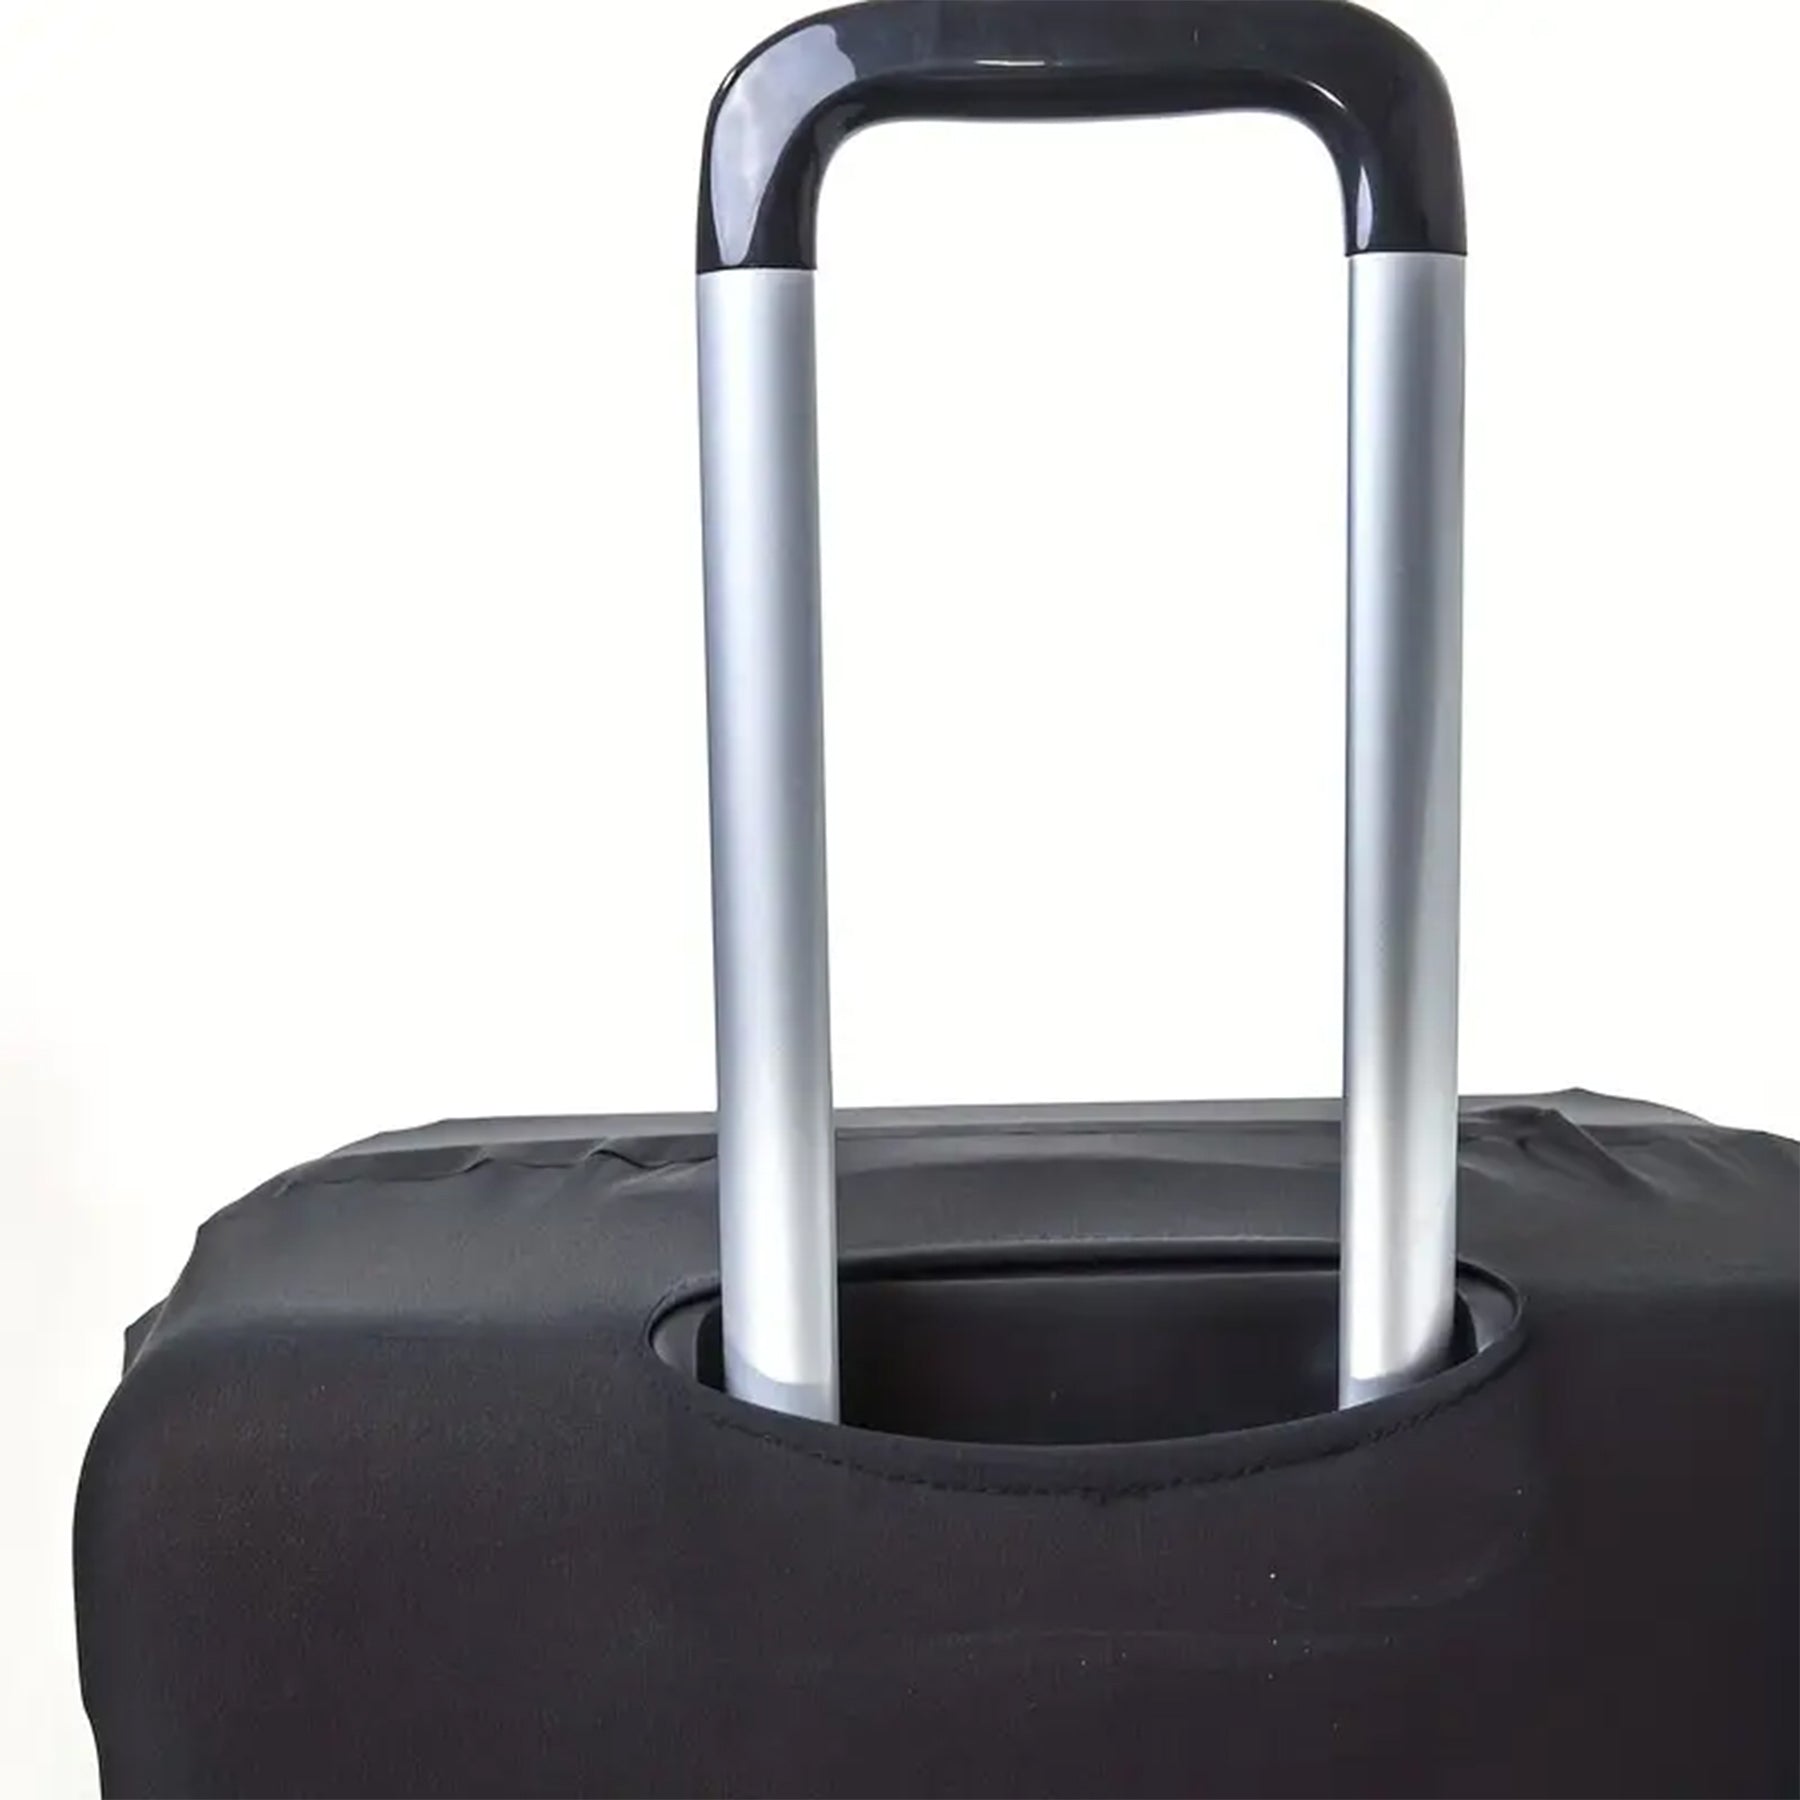 Luggage cover X-Large,Black